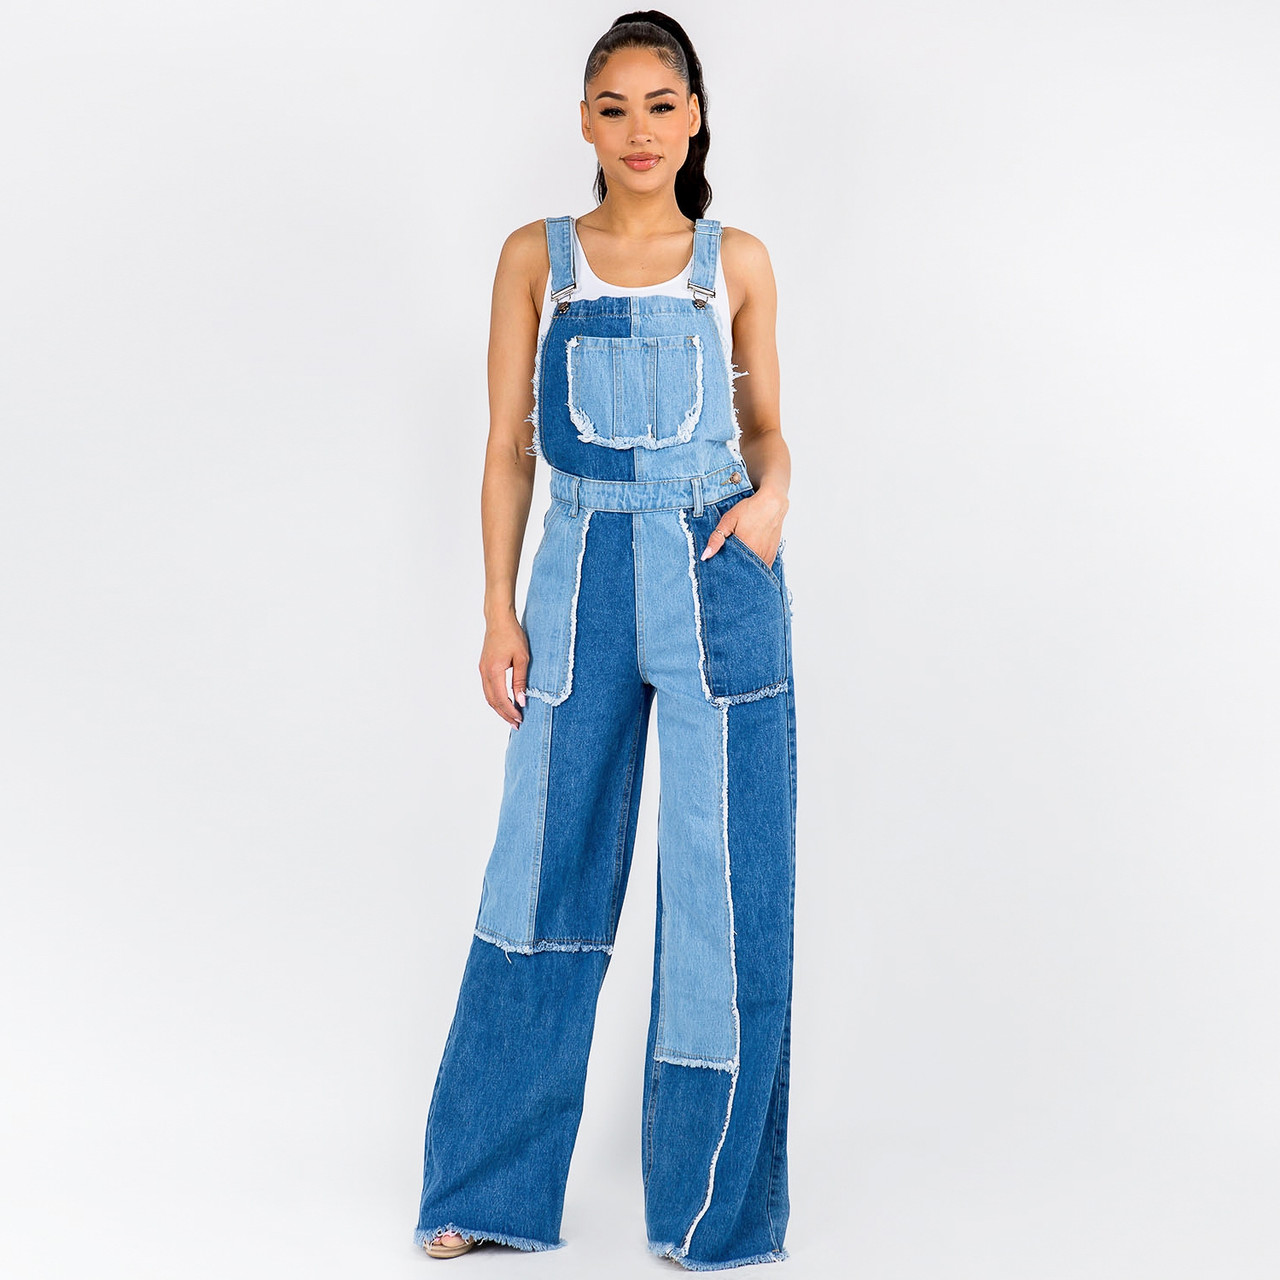 Piwonia - Letter Embroidered Distressed Wide Leg Denim Dungaree